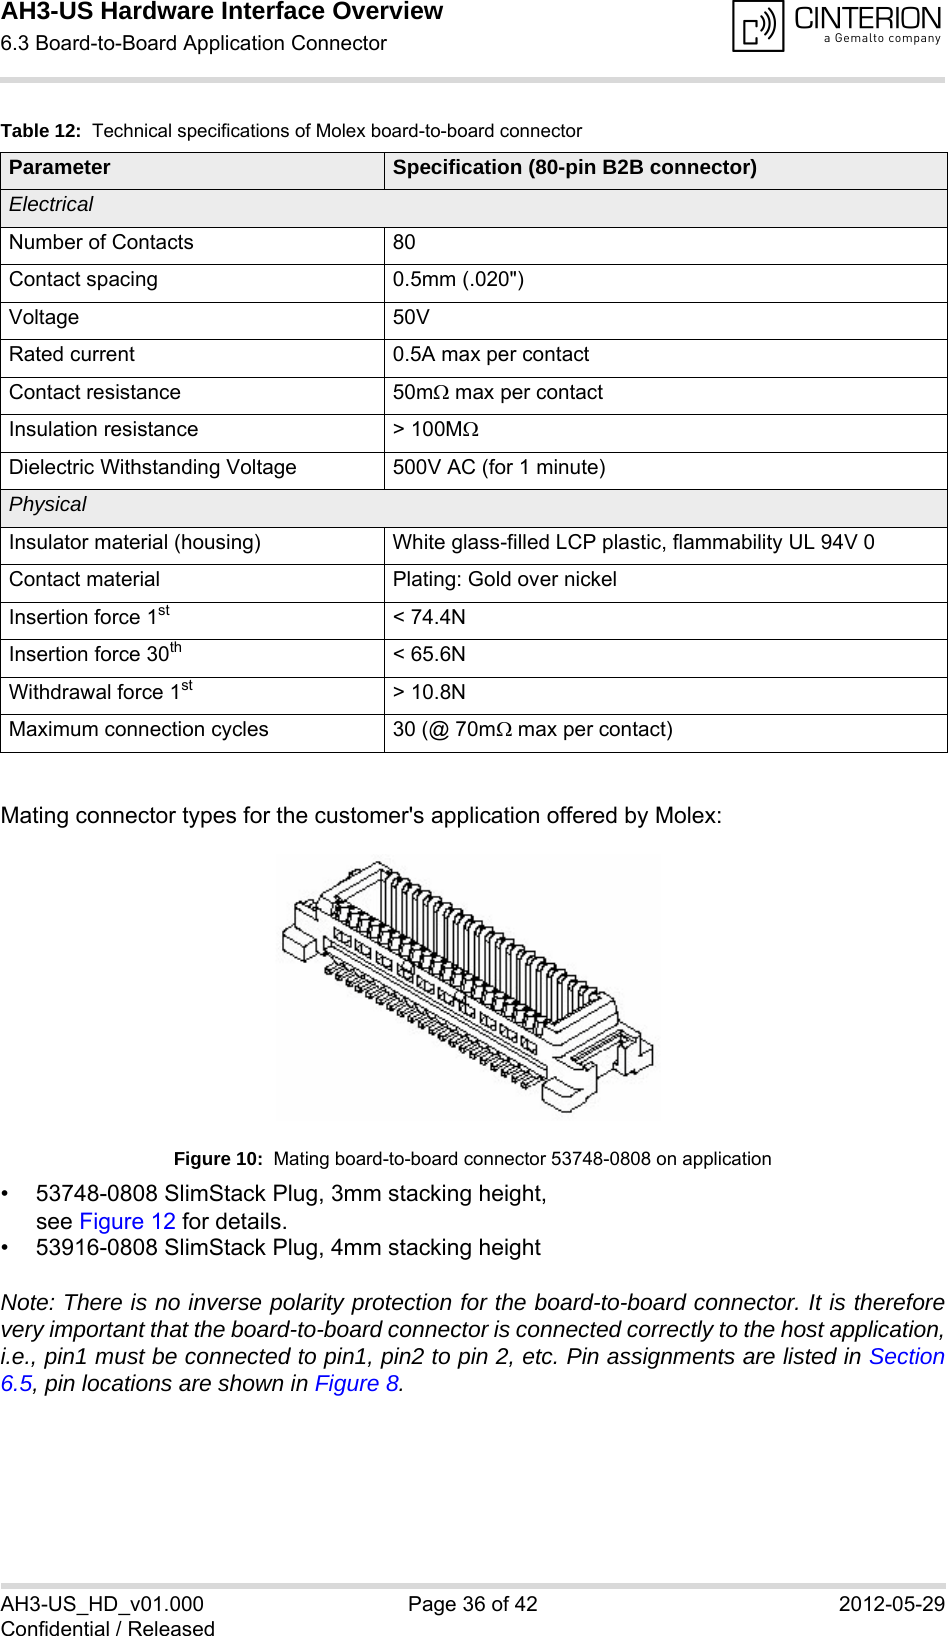 AH3-US Hardware Interface Overview6.3 Board-to-Board Application Connector38AH3-US_HD_v01.000 Page 36 of 42 2012-05-29Confidential / ReleasedMating connector types for the customer&apos;s application offered by Molex:Figure 10:  Mating board-to-board connector 53748-0808 on application• 53748-0808 SlimStack Plug, 3mm stacking height, see Figure 12 for details.• 53916-0808 SlimStack Plug, 4mm stacking heightNote: There is no inverse polarity protection for the board-to-board connector. It is thereforevery important that the board-to-board connector is connected correctly to the host application,i.e., pin1 must be connected to pin1, pin2 to pin 2, etc. Pin assignments are listed in Section6.5, pin locations are shown in Figure 8.Table 12:  Technical specifications of Molex board-to-board connectorParameter Specification (80-pin B2B connector)ElectricalNumber of Contacts 80Contact spacing 0.5mm (.020&quot;)Voltage 50VRated current 0.5A max per contactContact resistance 50m max per contactInsulation resistance &gt; 100MDielectric Withstanding Voltage 500V AC (for 1 minute)PhysicalInsulator material (housing) White glass-filled LCP plastic, flammability UL 94V 0Contact material Plating: Gold over nickelInsertion force 1st &lt; 74.4NInsertion force 30th &lt; 65.6NWithdrawal force 1st &gt; 10.8NMaximum connection cycles 30 (@ 70m max per contact)